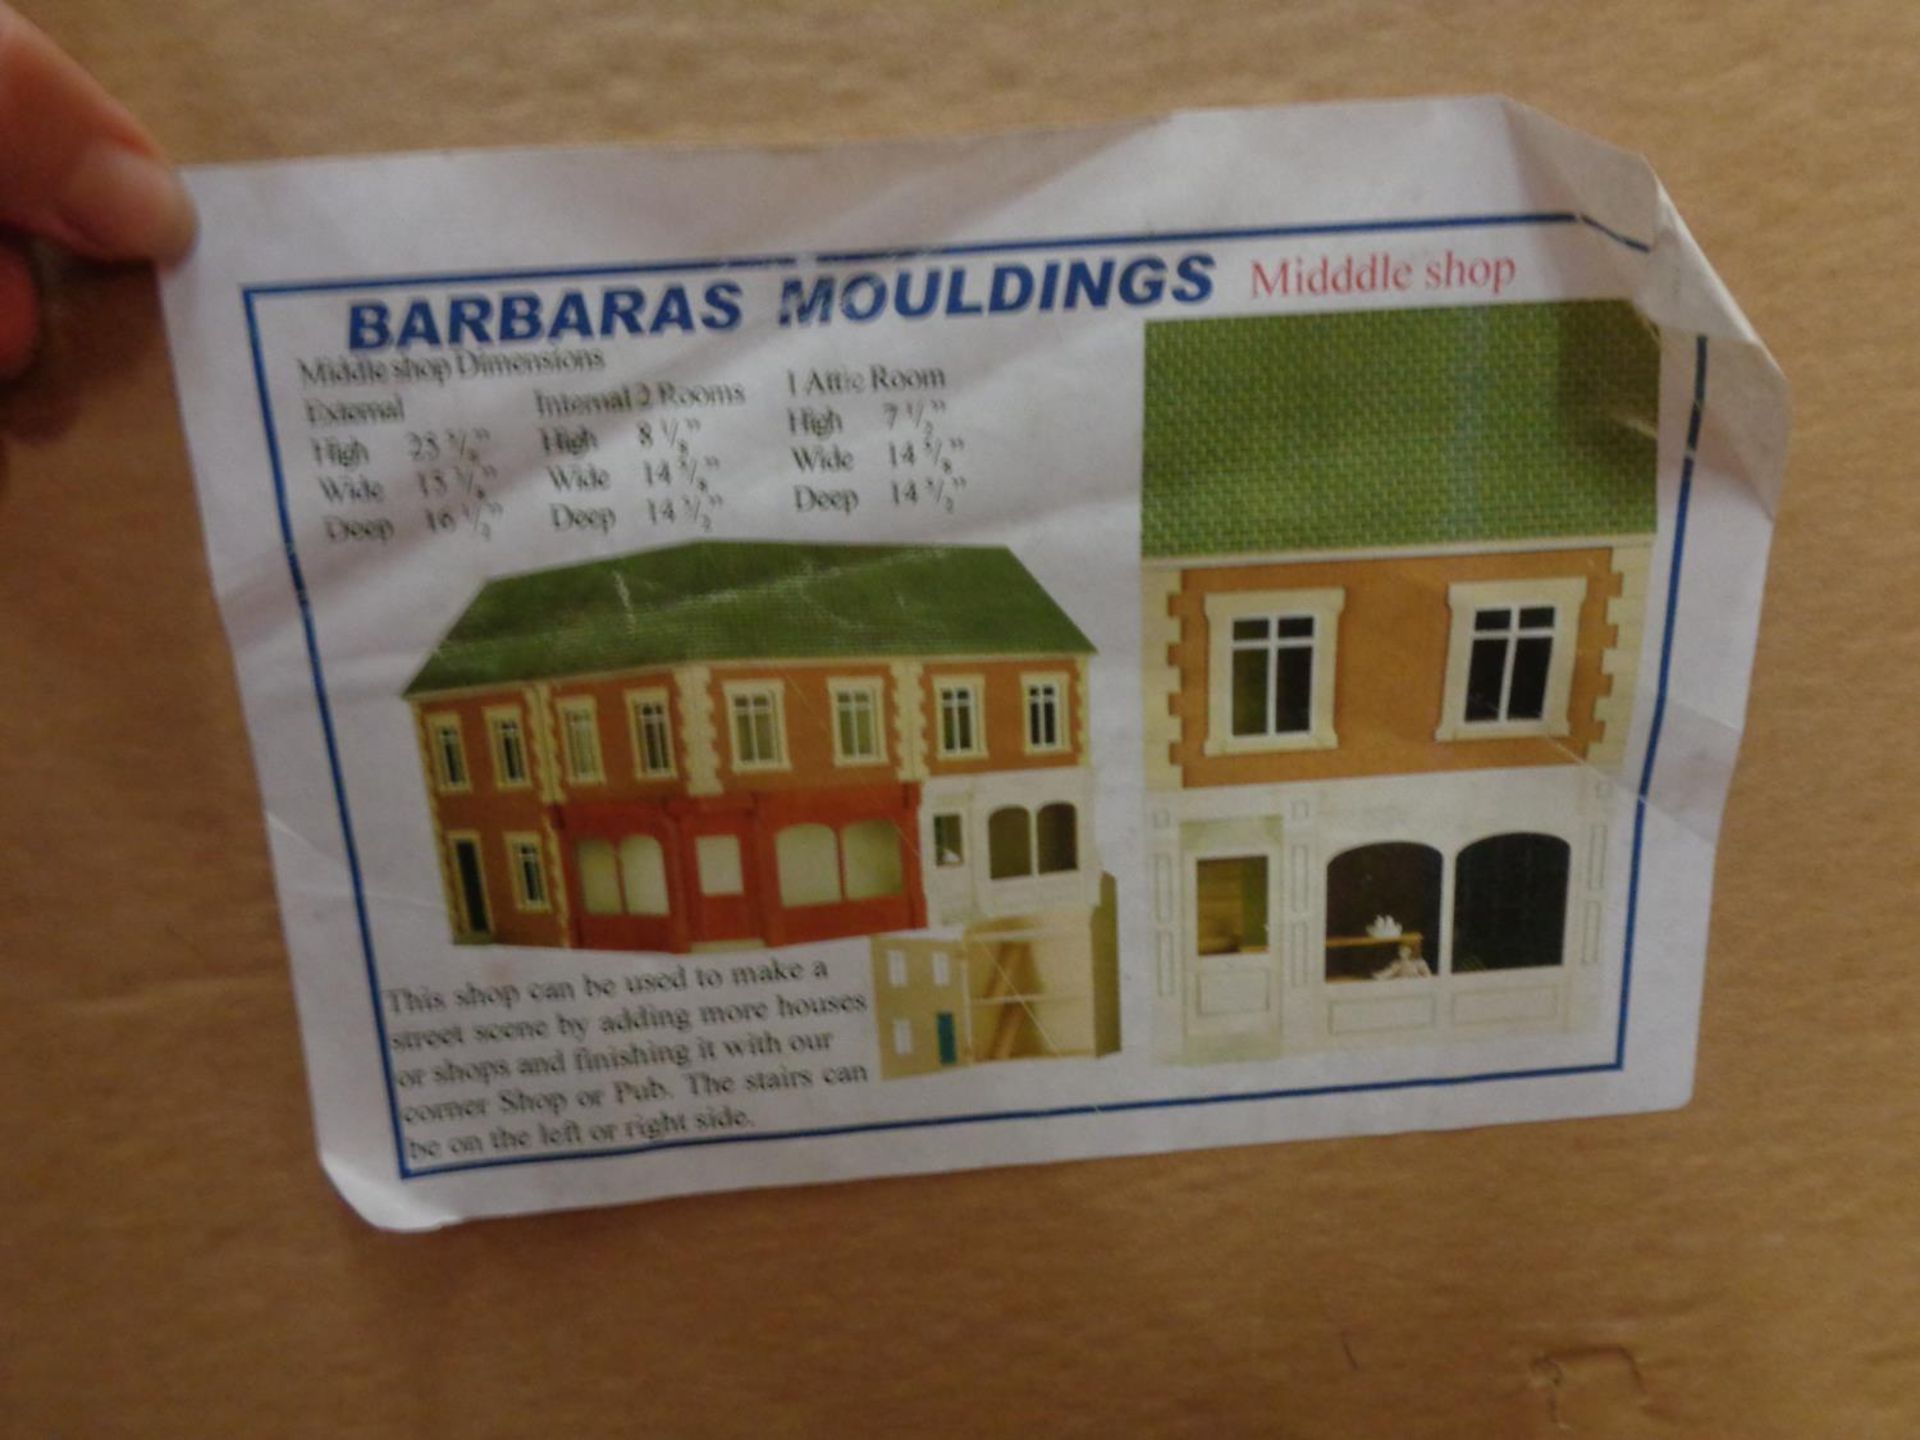 A BOXED BARBARAS MOULDINGS MODEL SHOP KIT AND A READY BUILT SECTION - Image 2 of 3